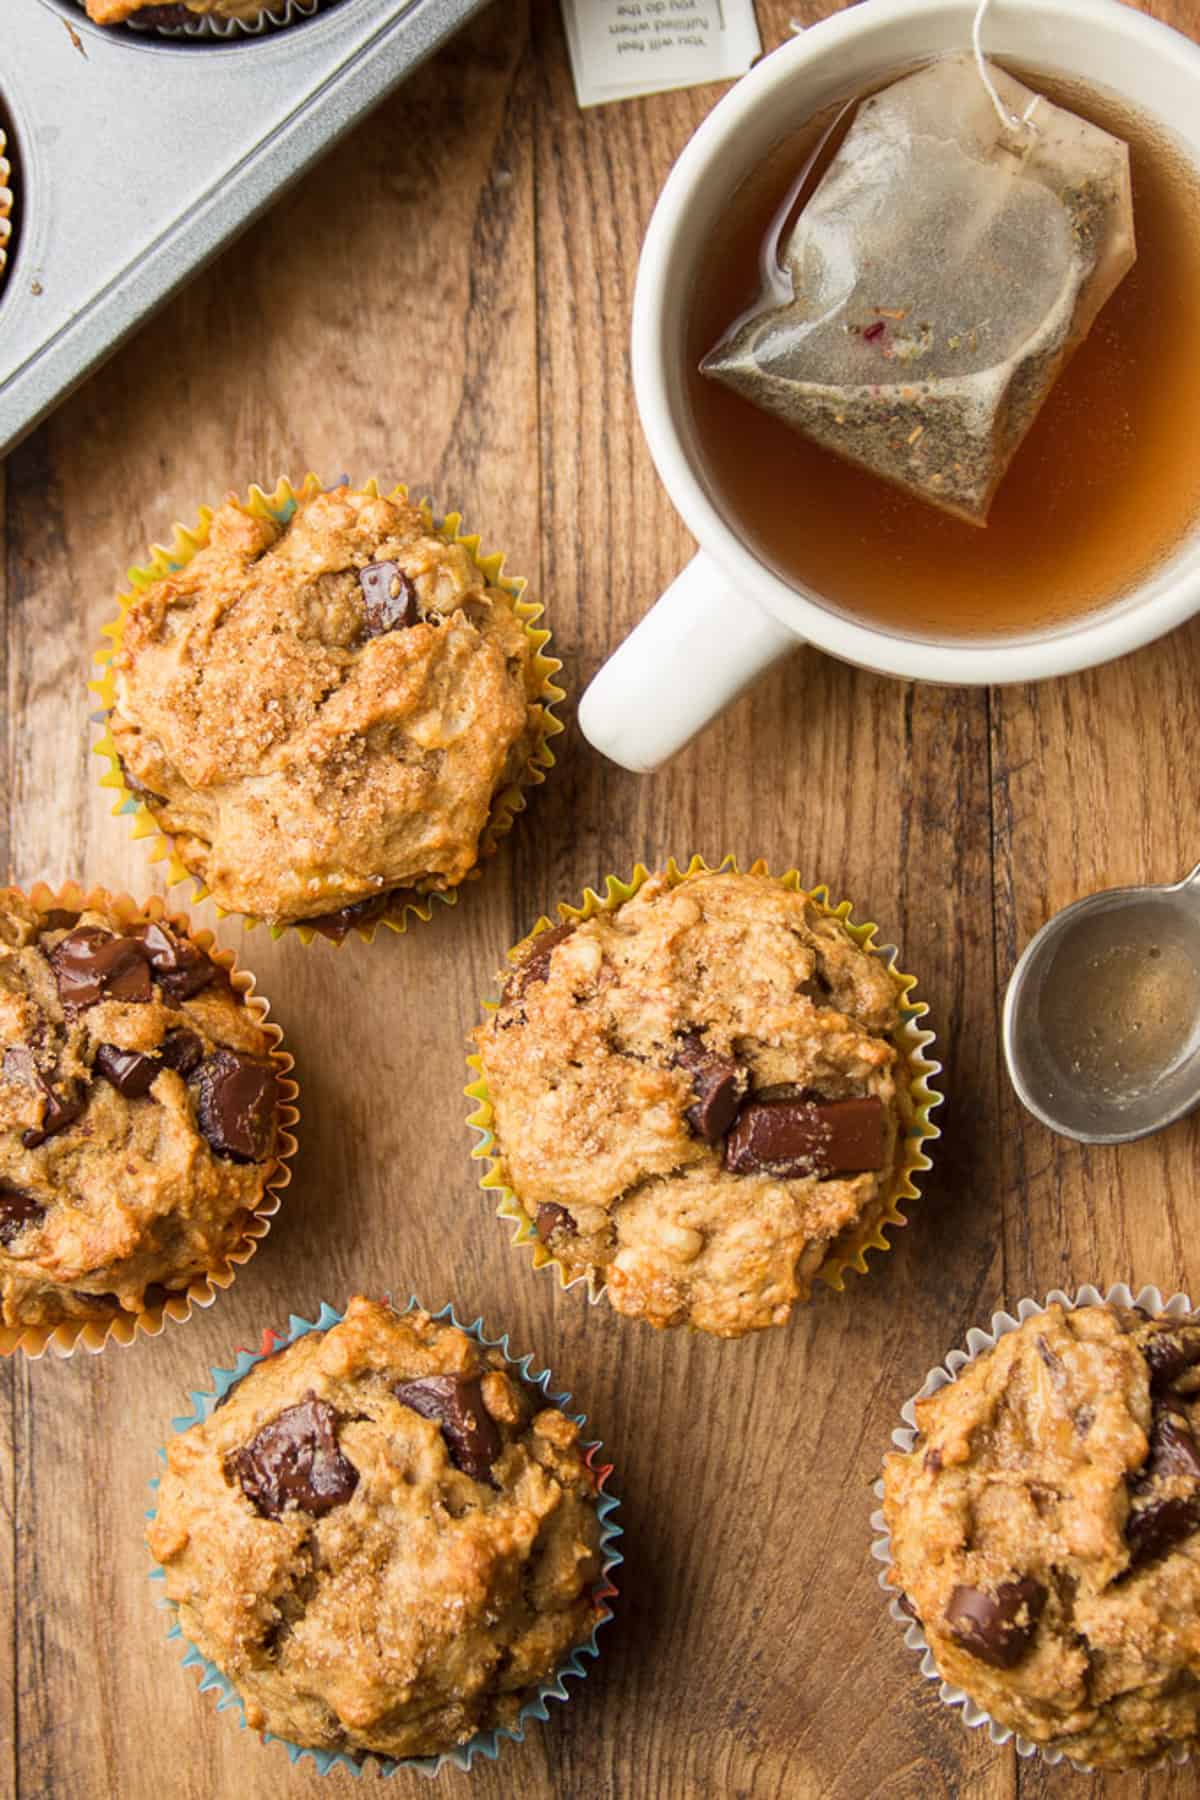 Vegan Banana Muffins on a wooden surface with cup of tea and spoon.